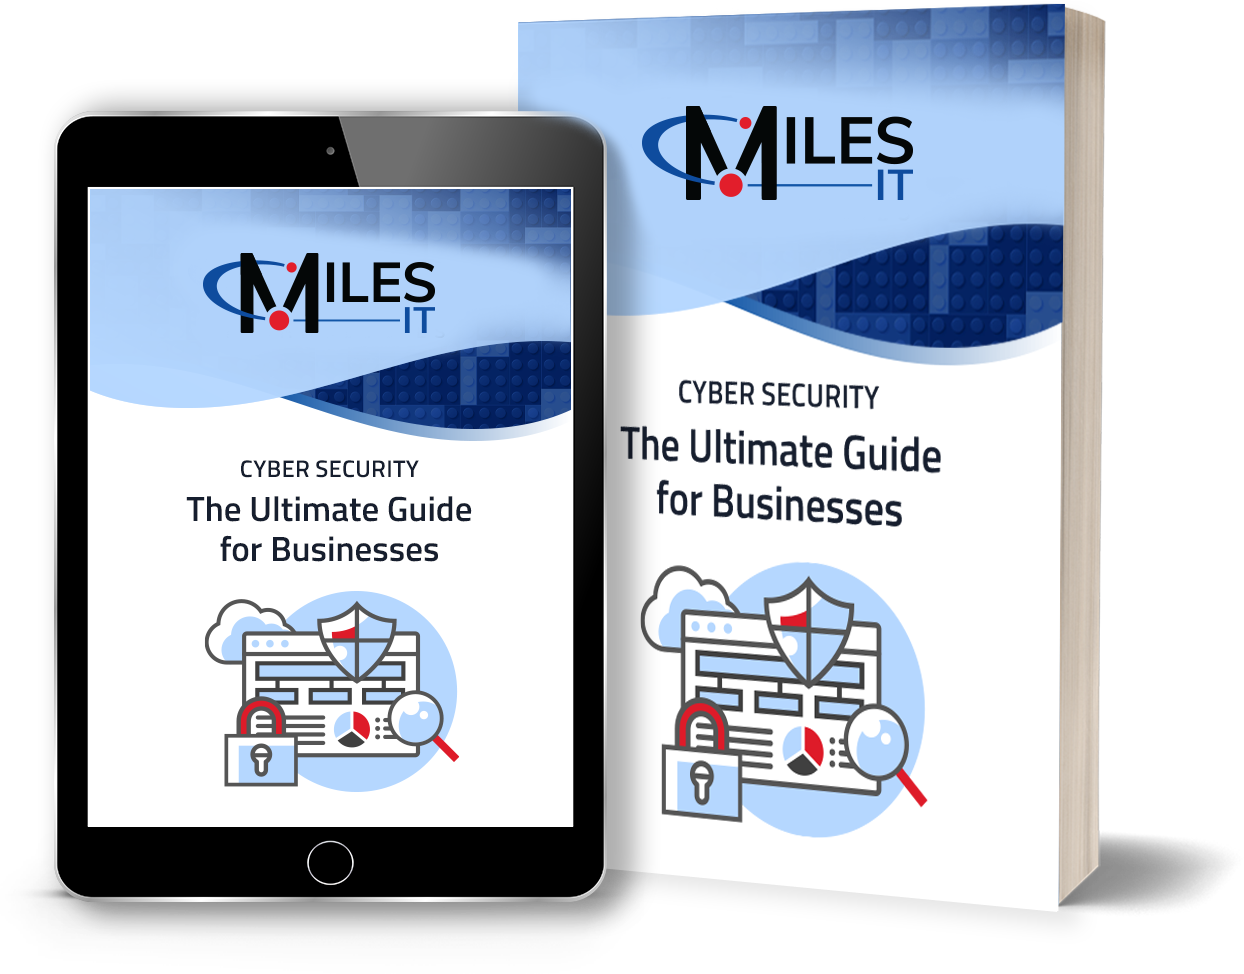 Physical and digital versions of Cyber Security The Ultimate Guide for Businesses